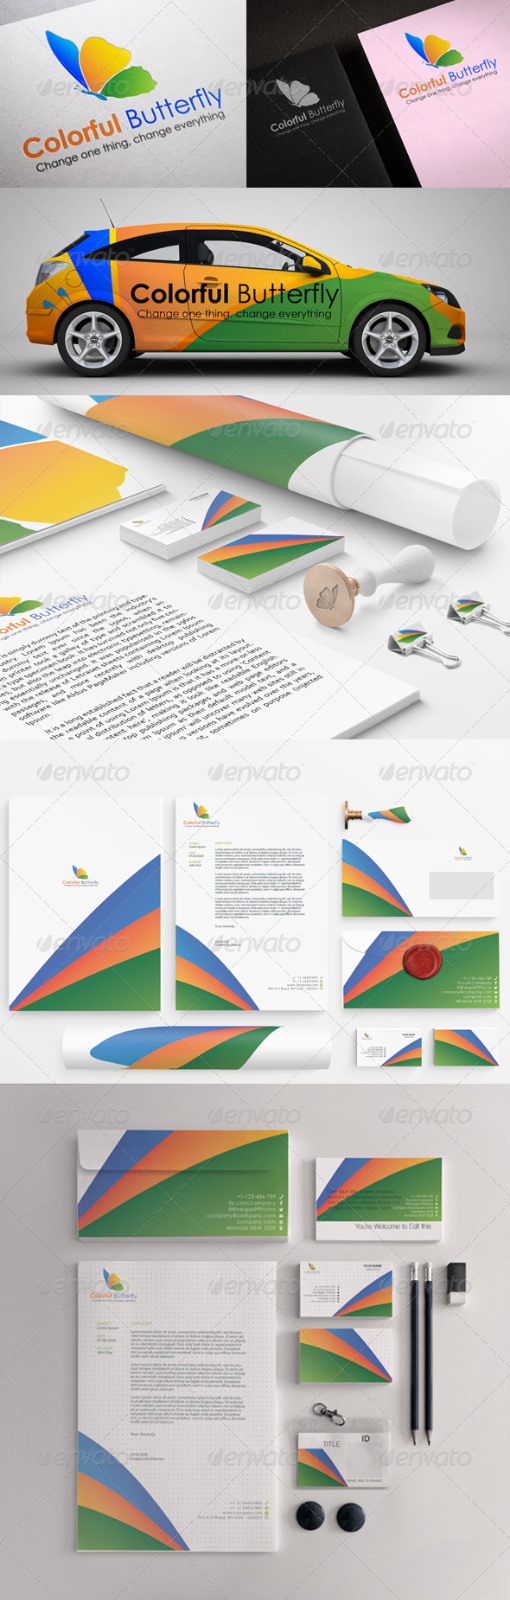 VISԴļ colorful-butterfly-stationary-printing-templates